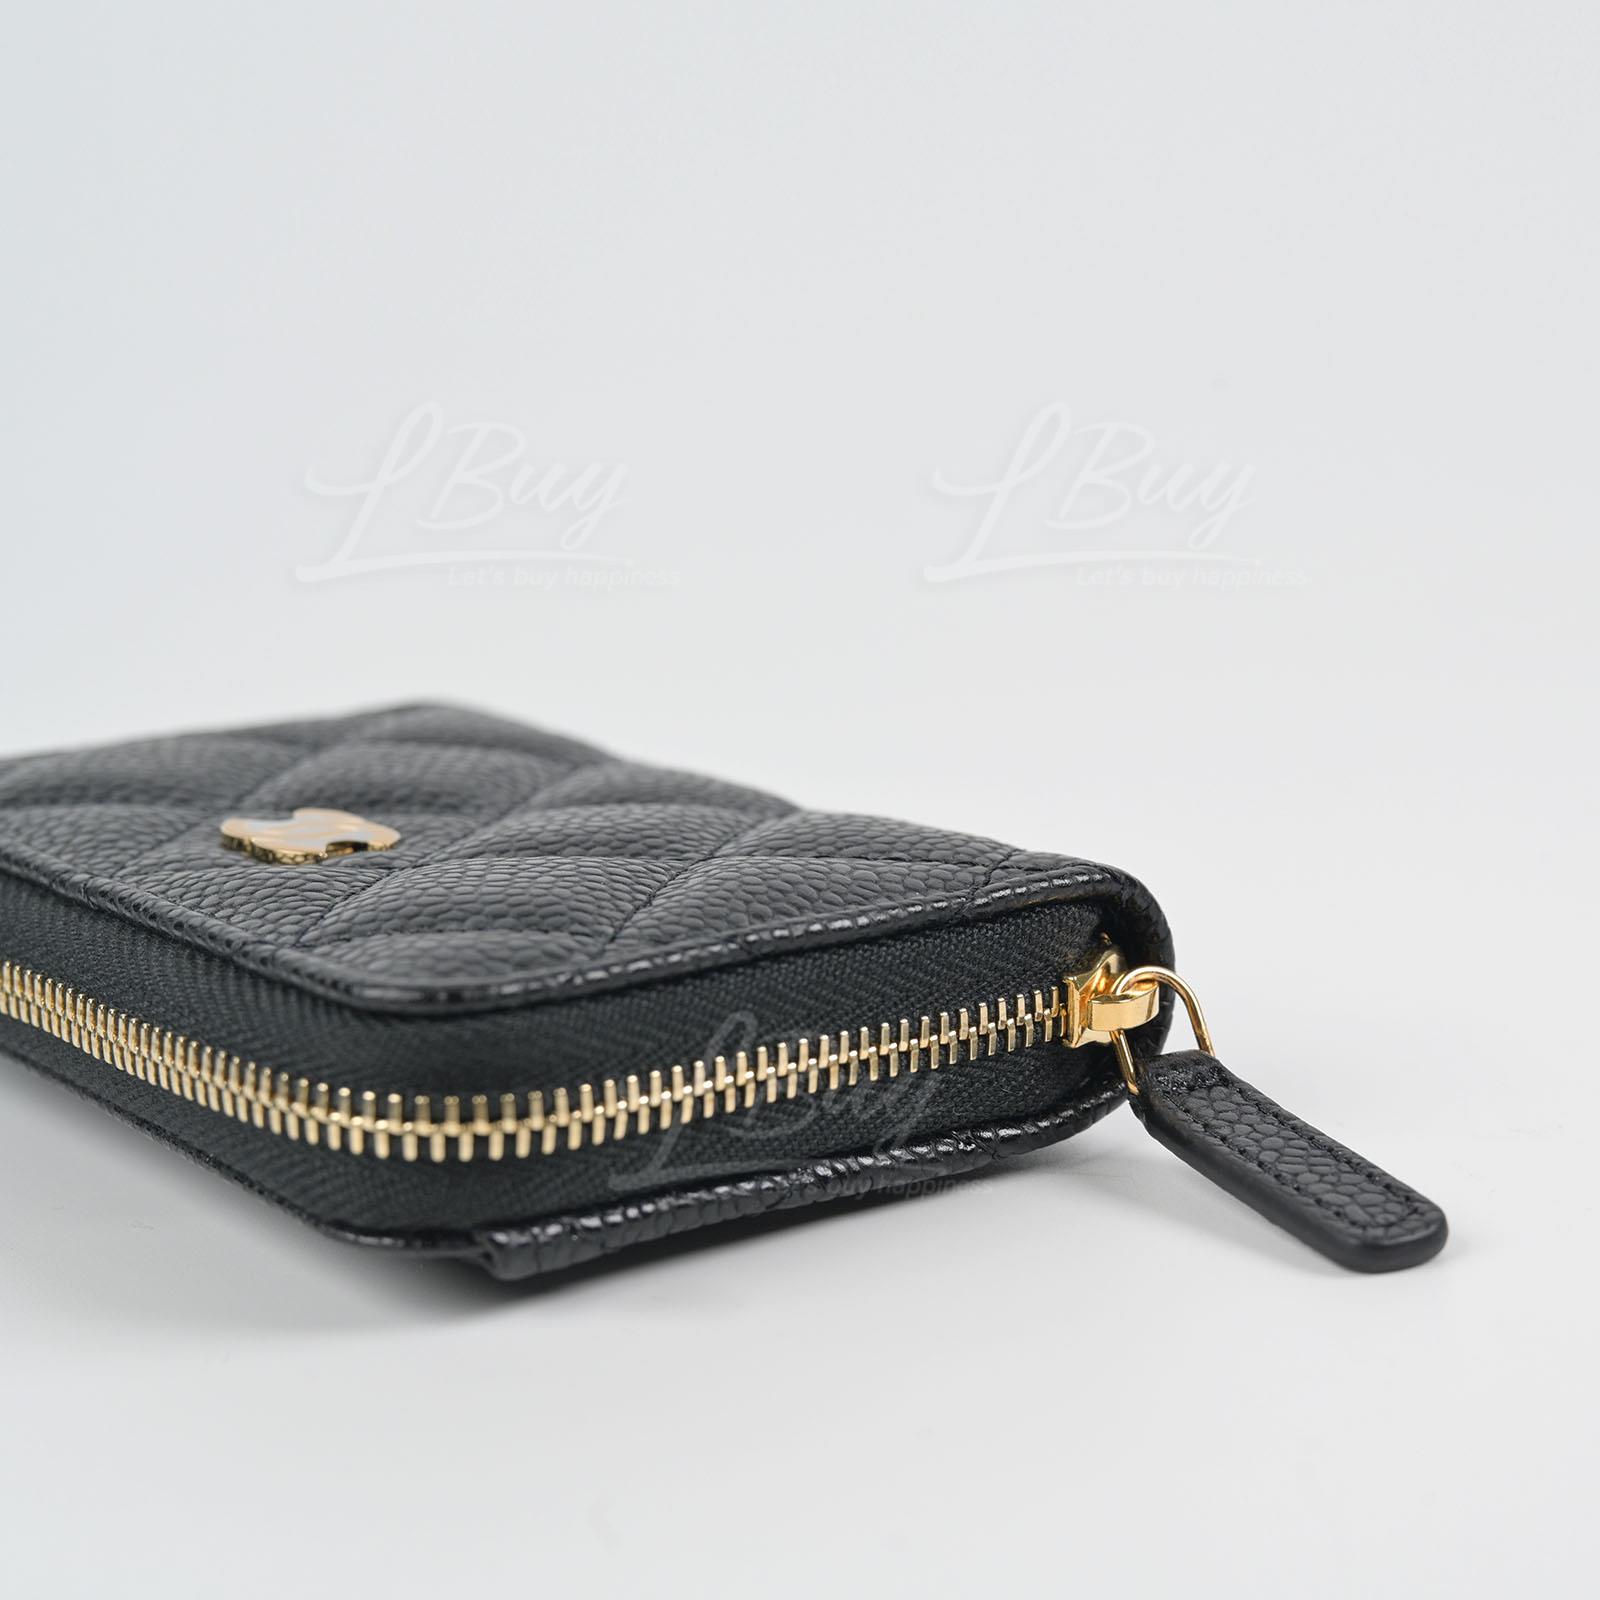 CHANEL Classic Zipped Coin Purse (AP0216 Y01588 C3906)